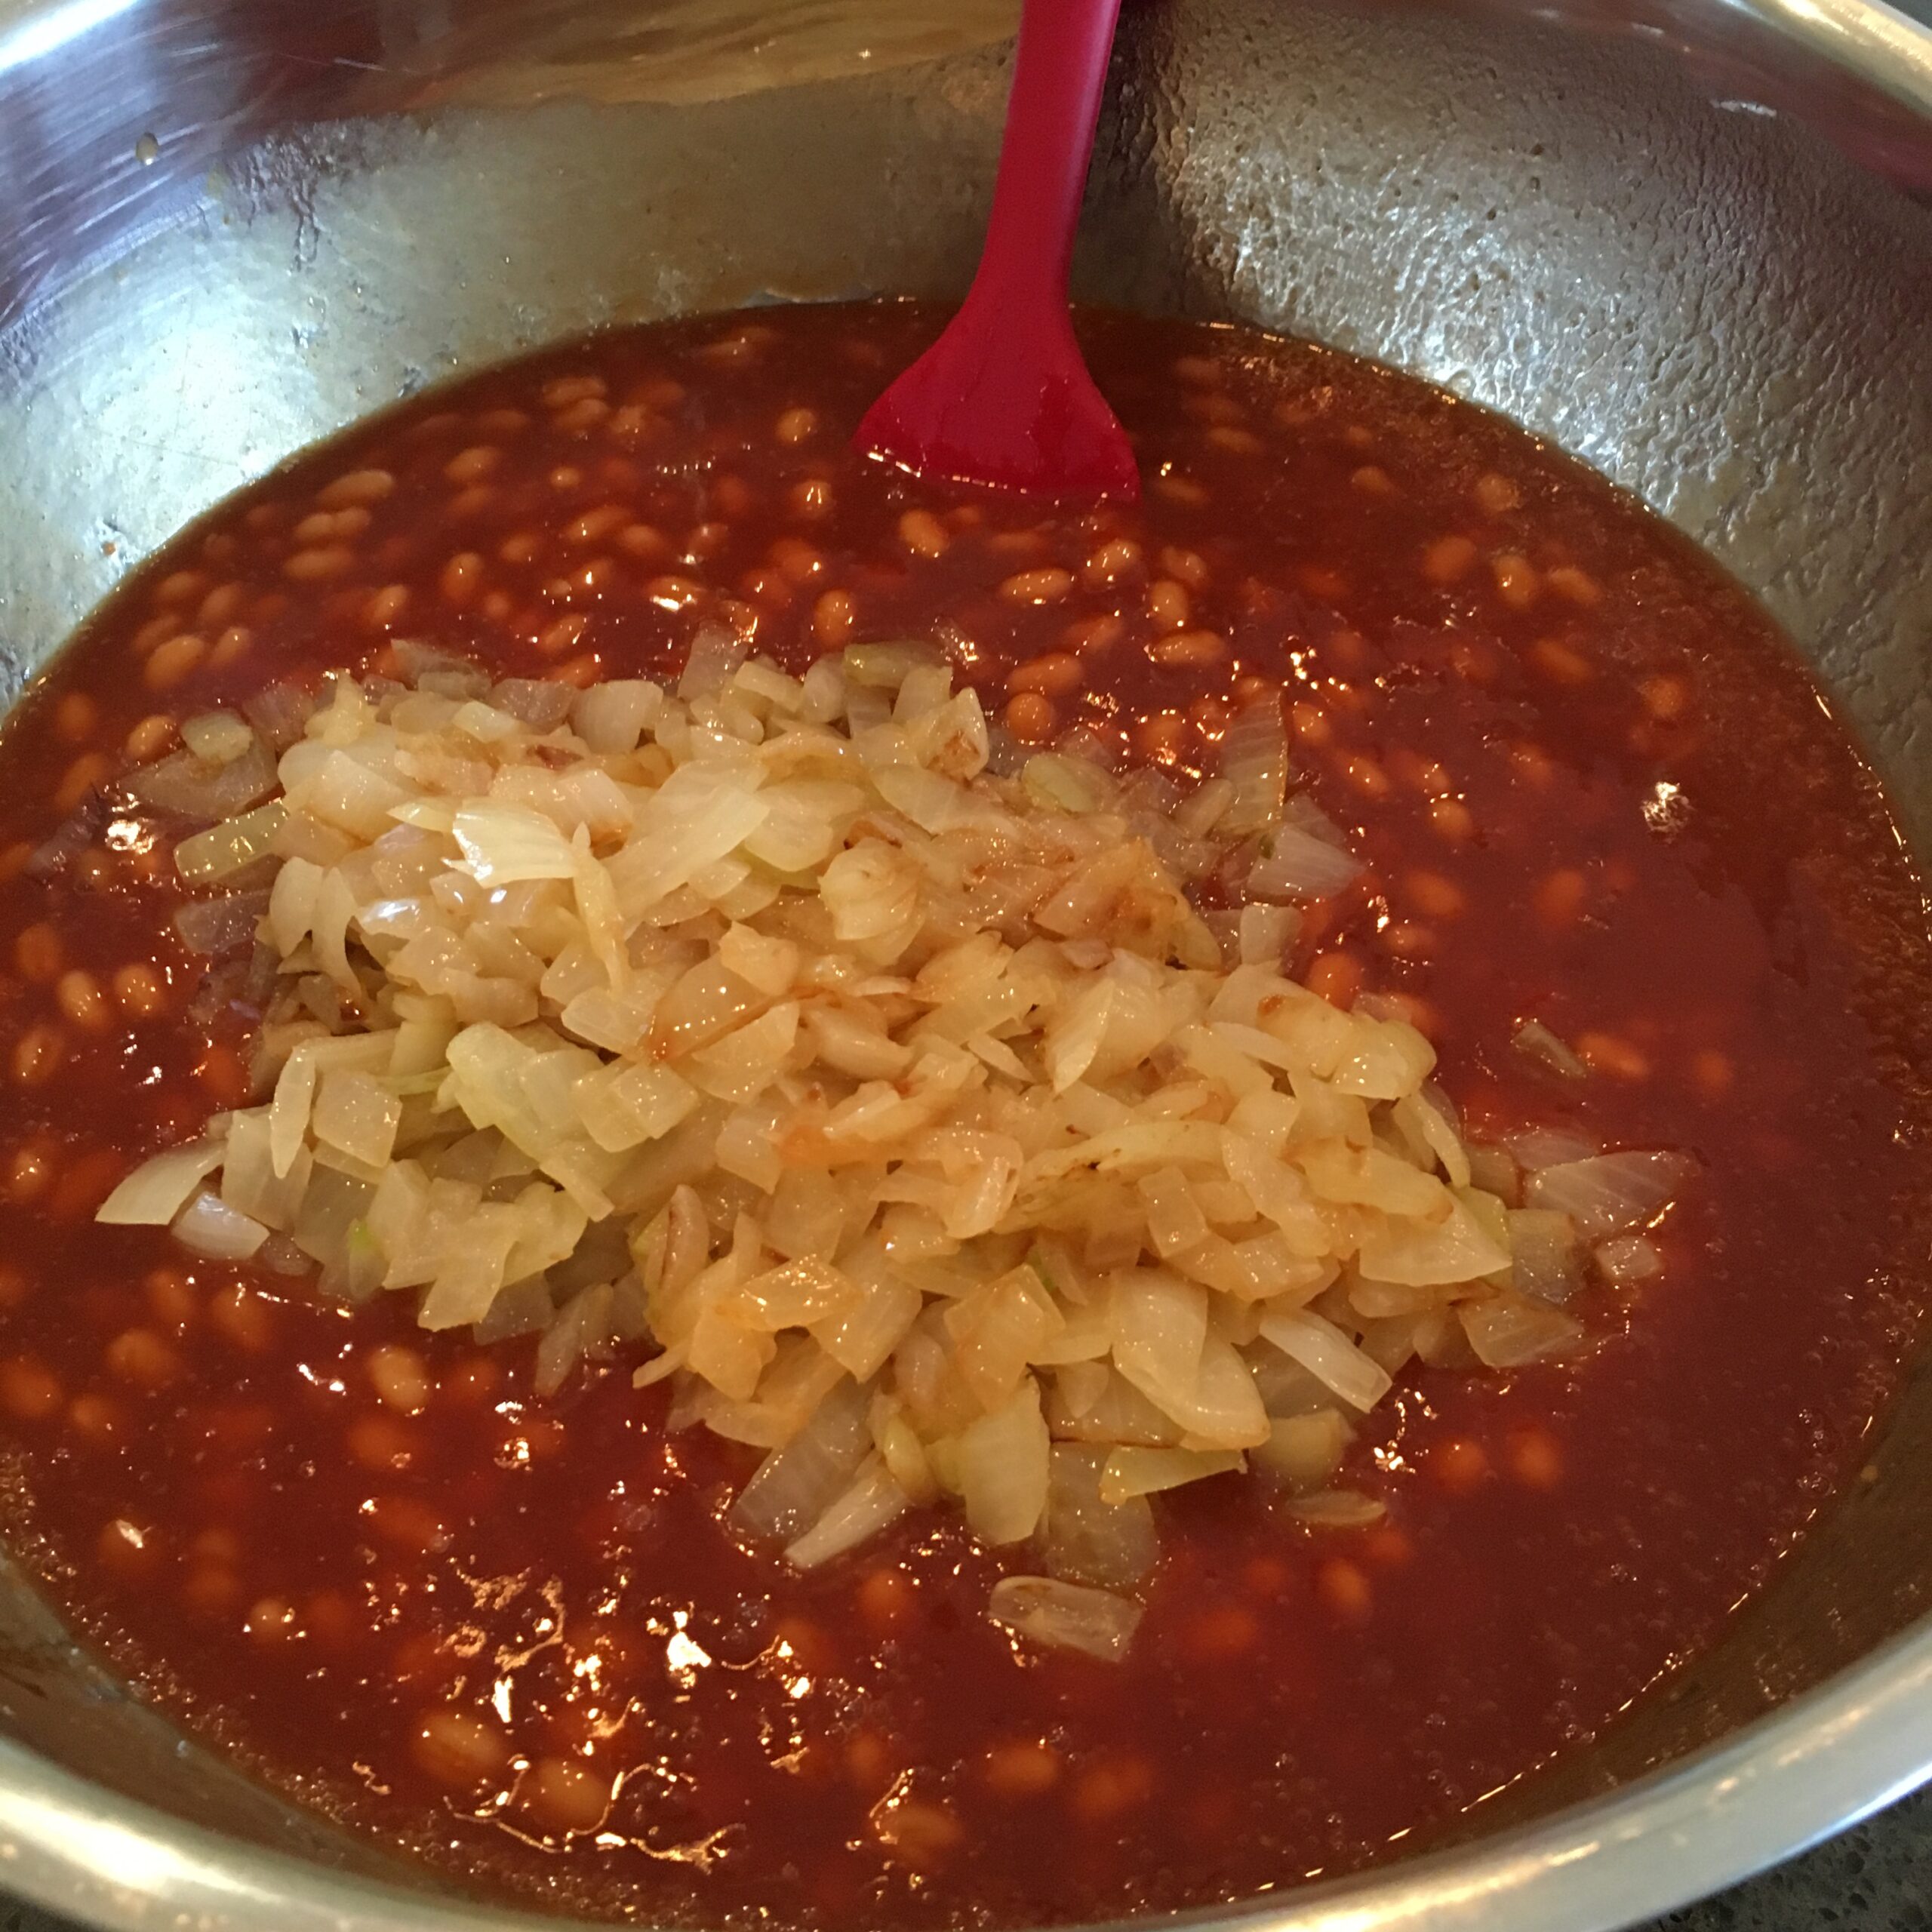 Mixing the beans and sautéd onions in a bowl.